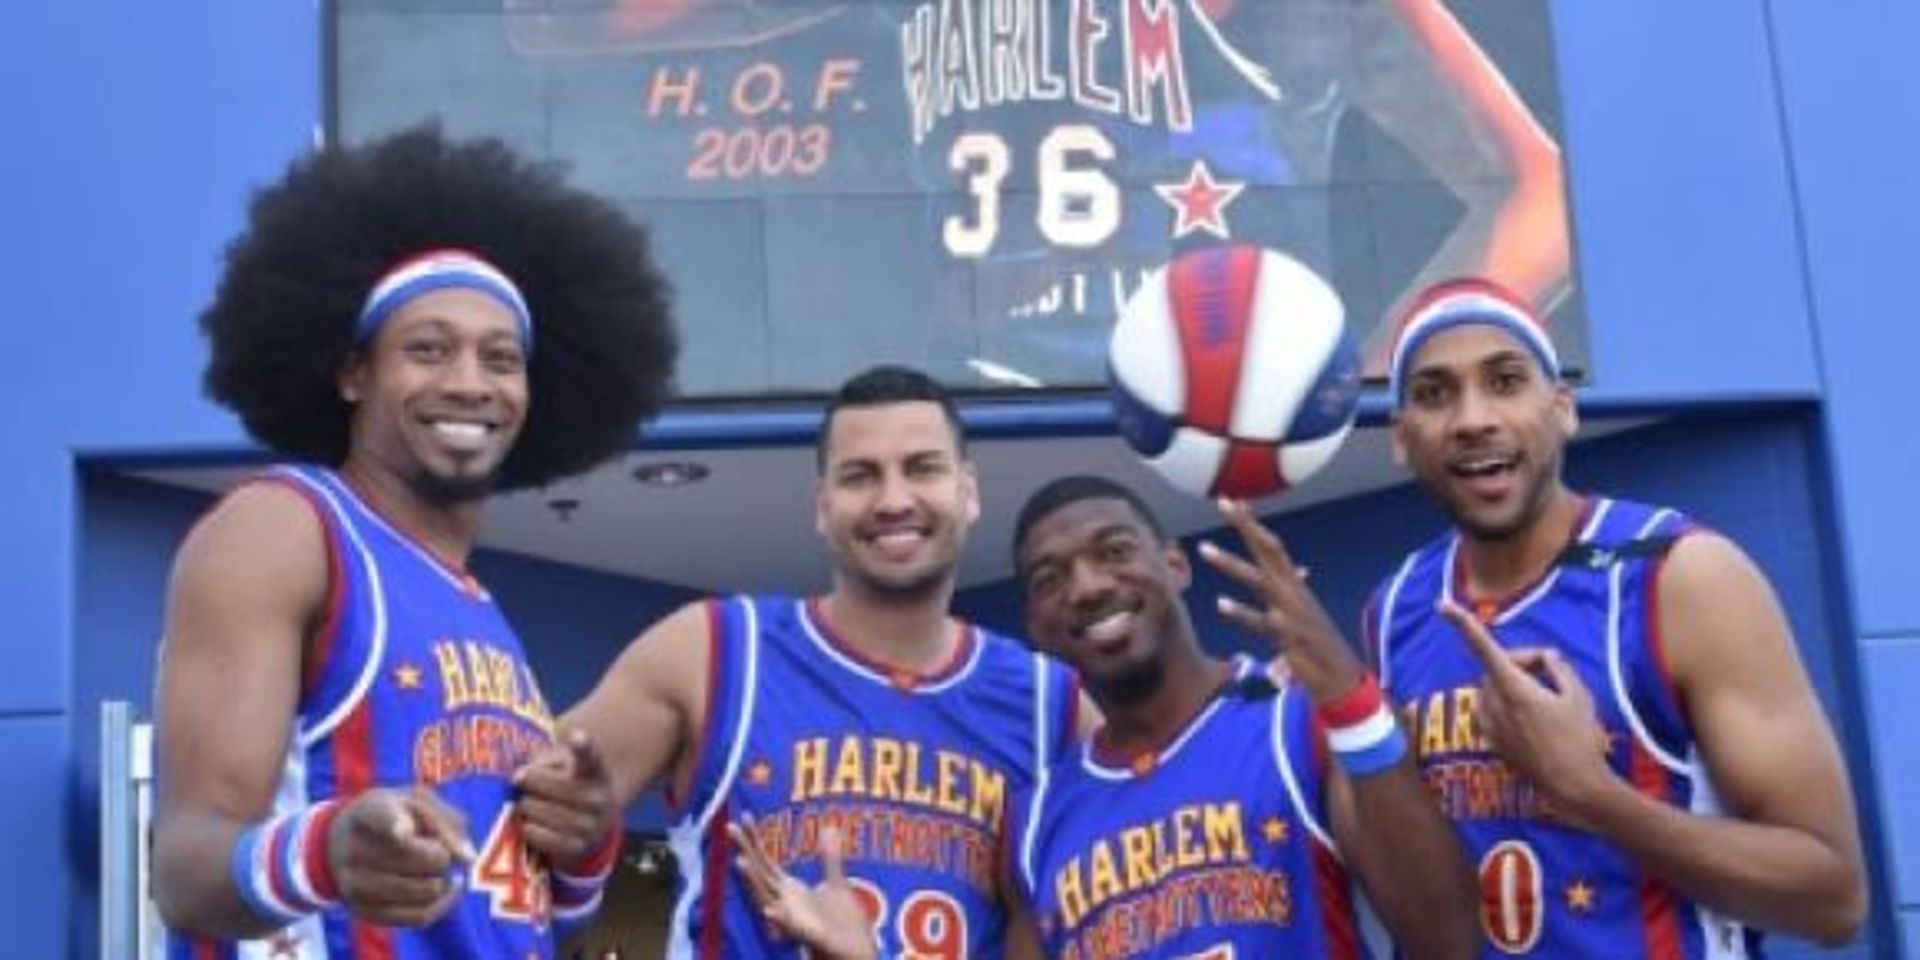 VIP experience watching the world famous Harlem Globetrotters in London for four guests